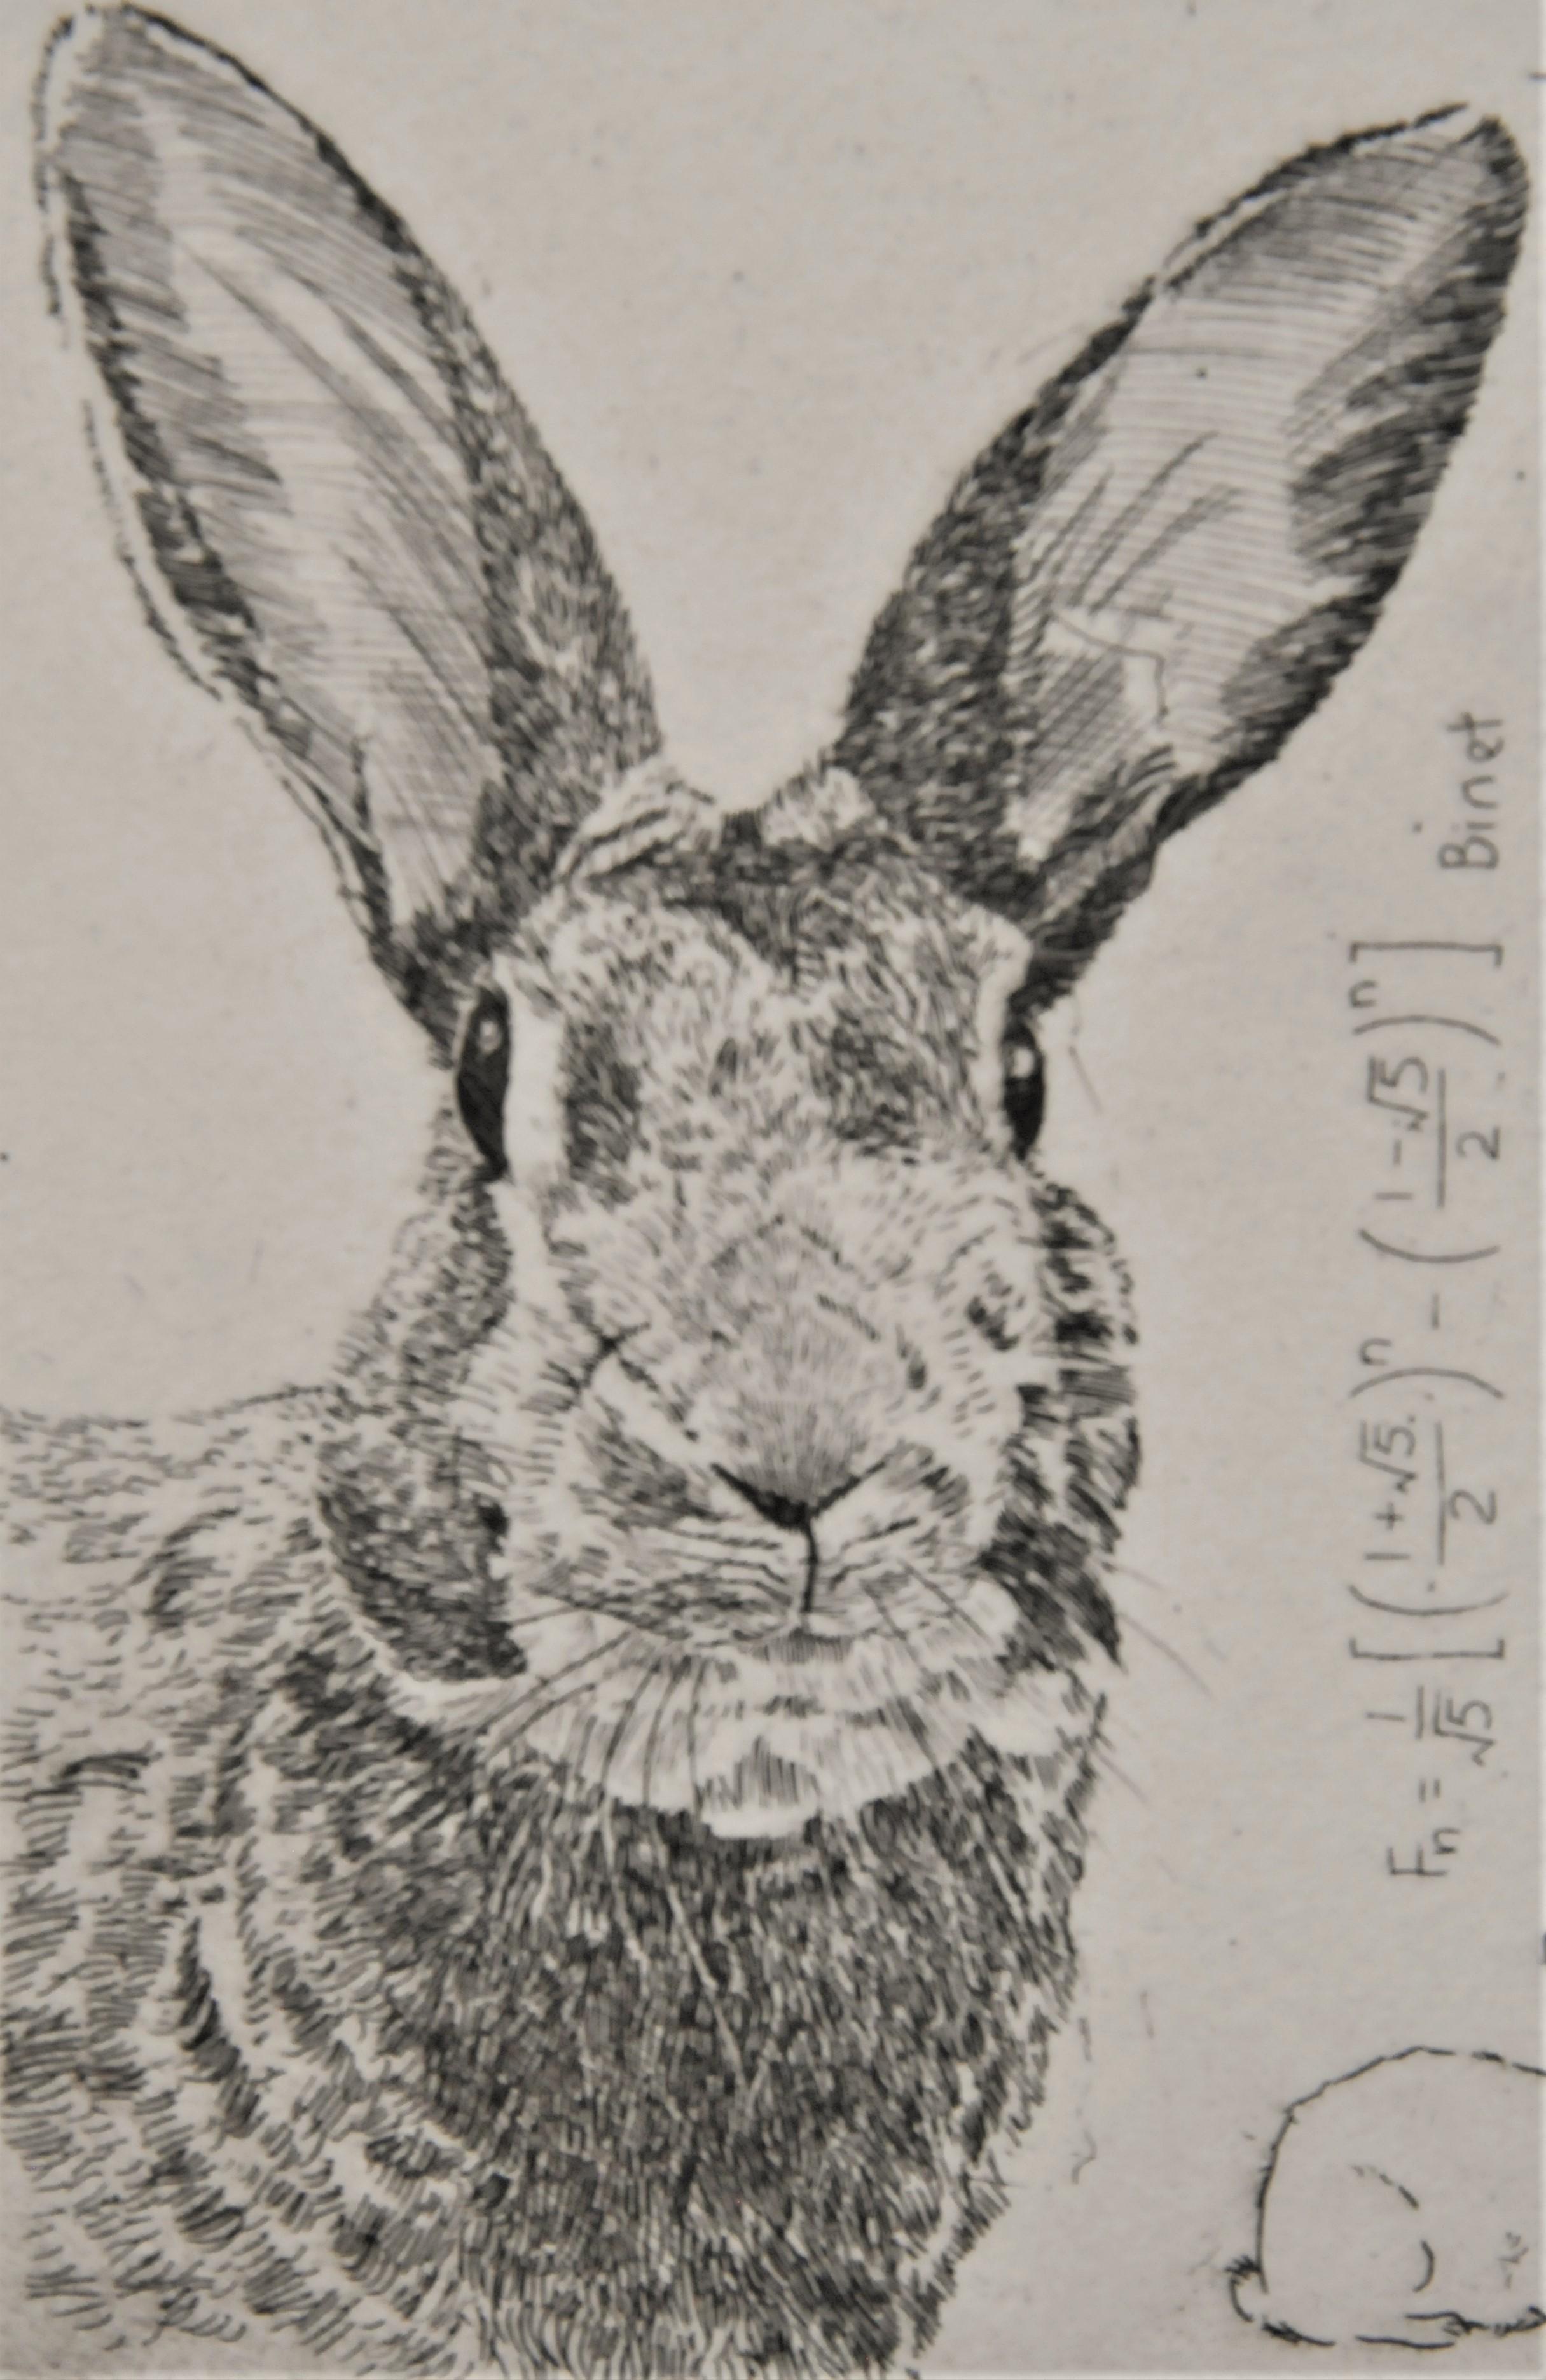 WILL TAYLOR Fibonacci's Rabbit Original limited edition of 50 – printed by the artist on Somerset 300gsm Cotton paper Copper-plate etching Image size W 20 cm x H 15 cm Sheet size W 34 cm x H 29 cm Sold unframed Free Shipping Please note that in situ